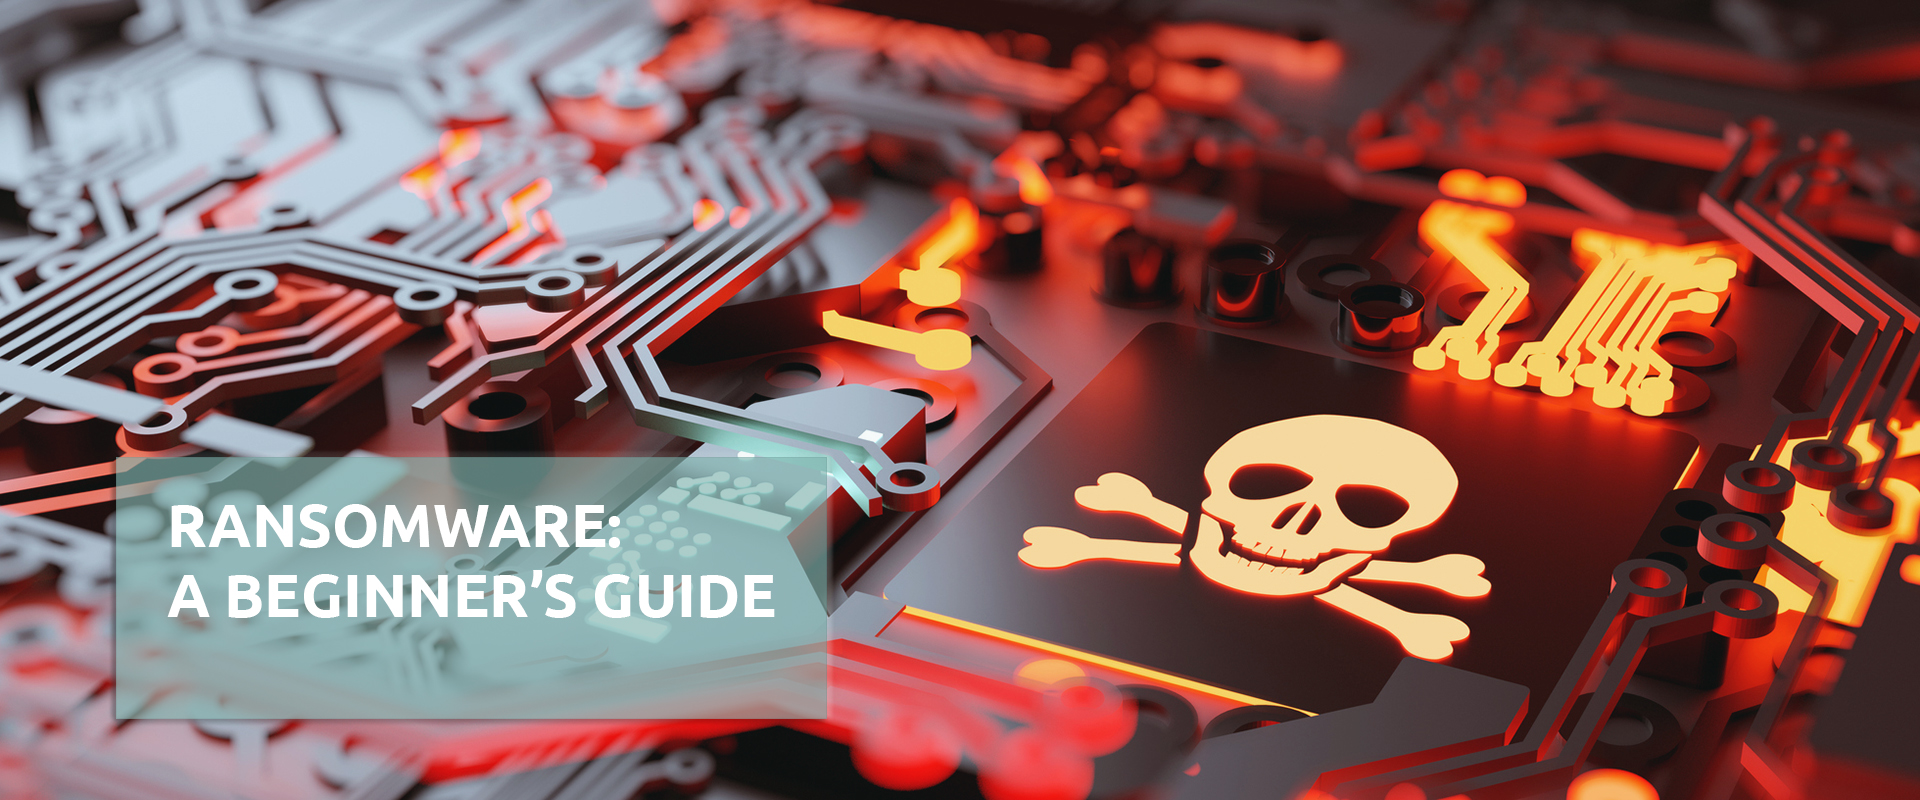 eBook: A Beginner's Guide to Ransomware